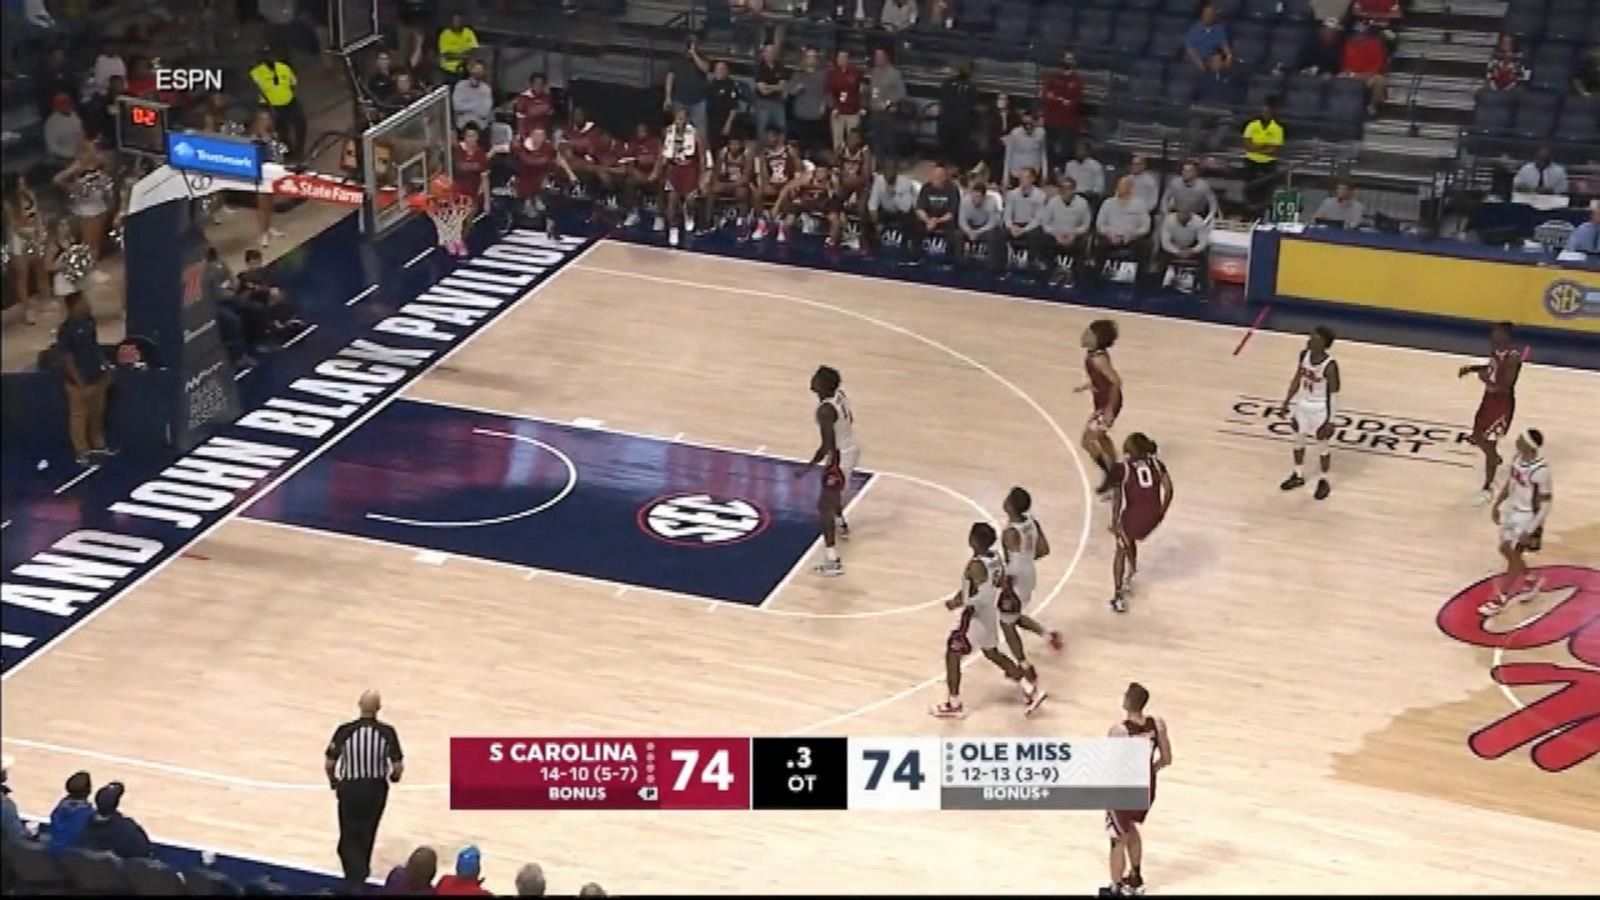 South Carolina wins against Ole Miss with half court buzzer beater